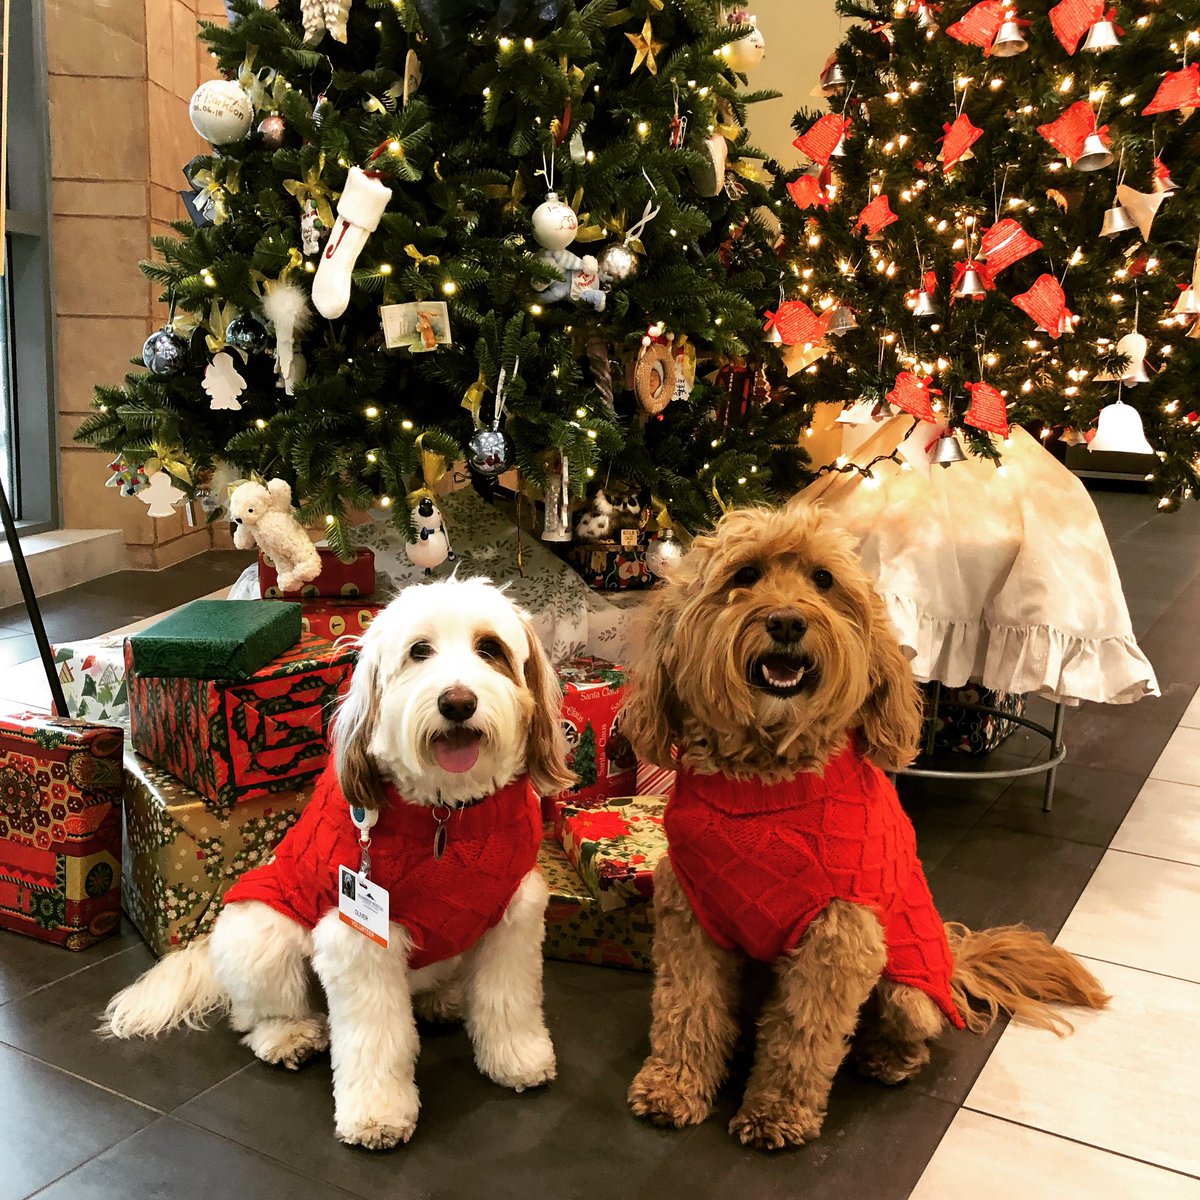 We wish you a Merry Christmas and a happy, healthy, prosperous new year filled with love and laughter! #happyholidays #merrychristmas #happypawlidays